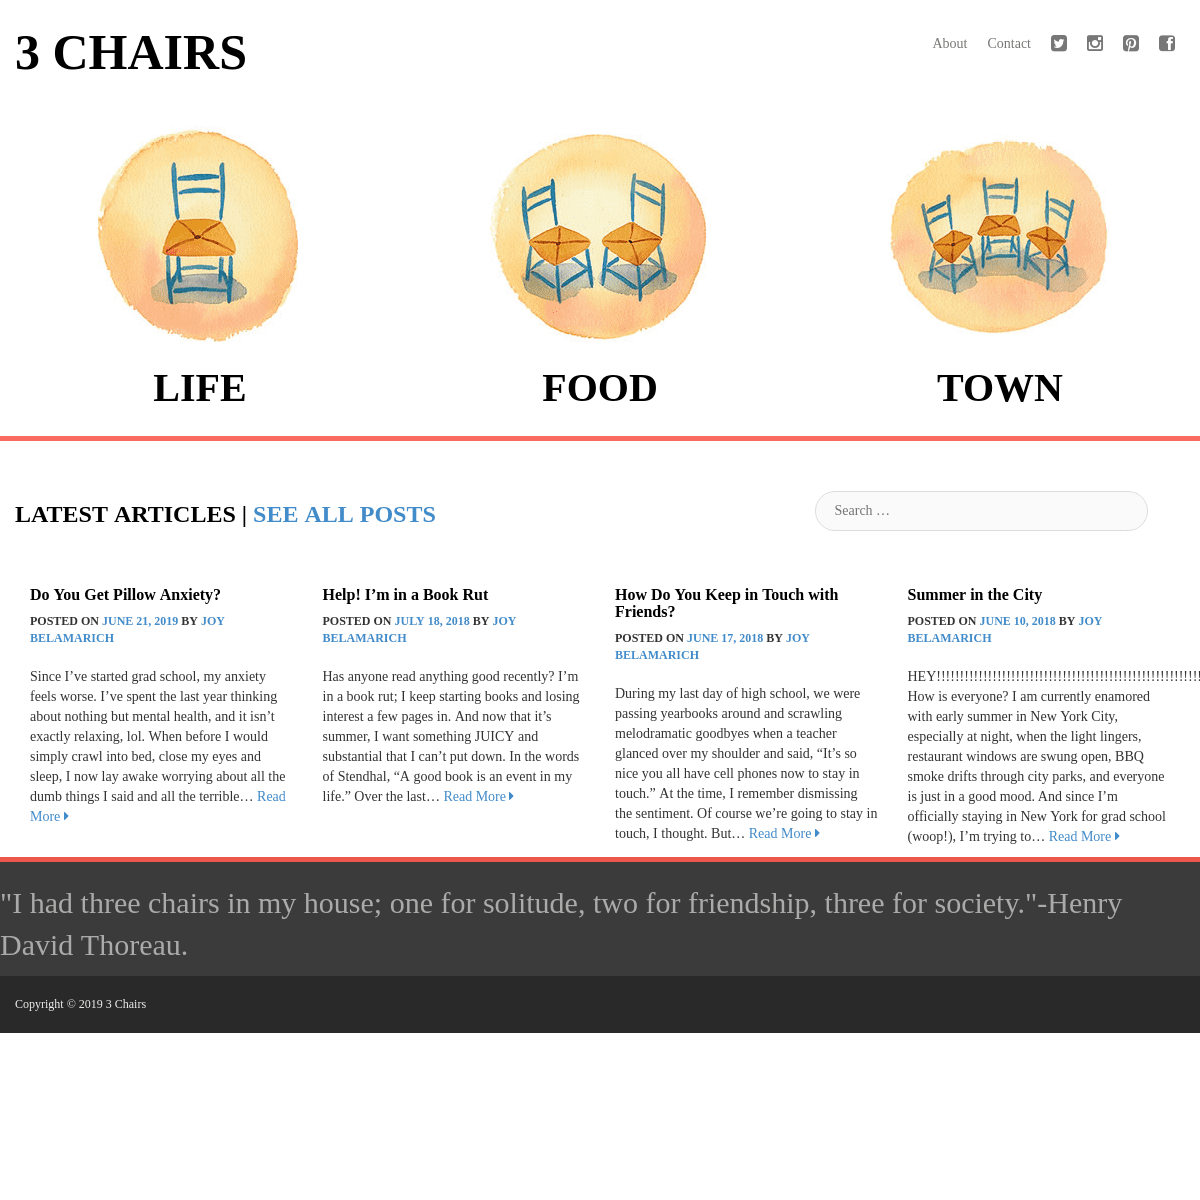 A complete backup of 3-chairs.com